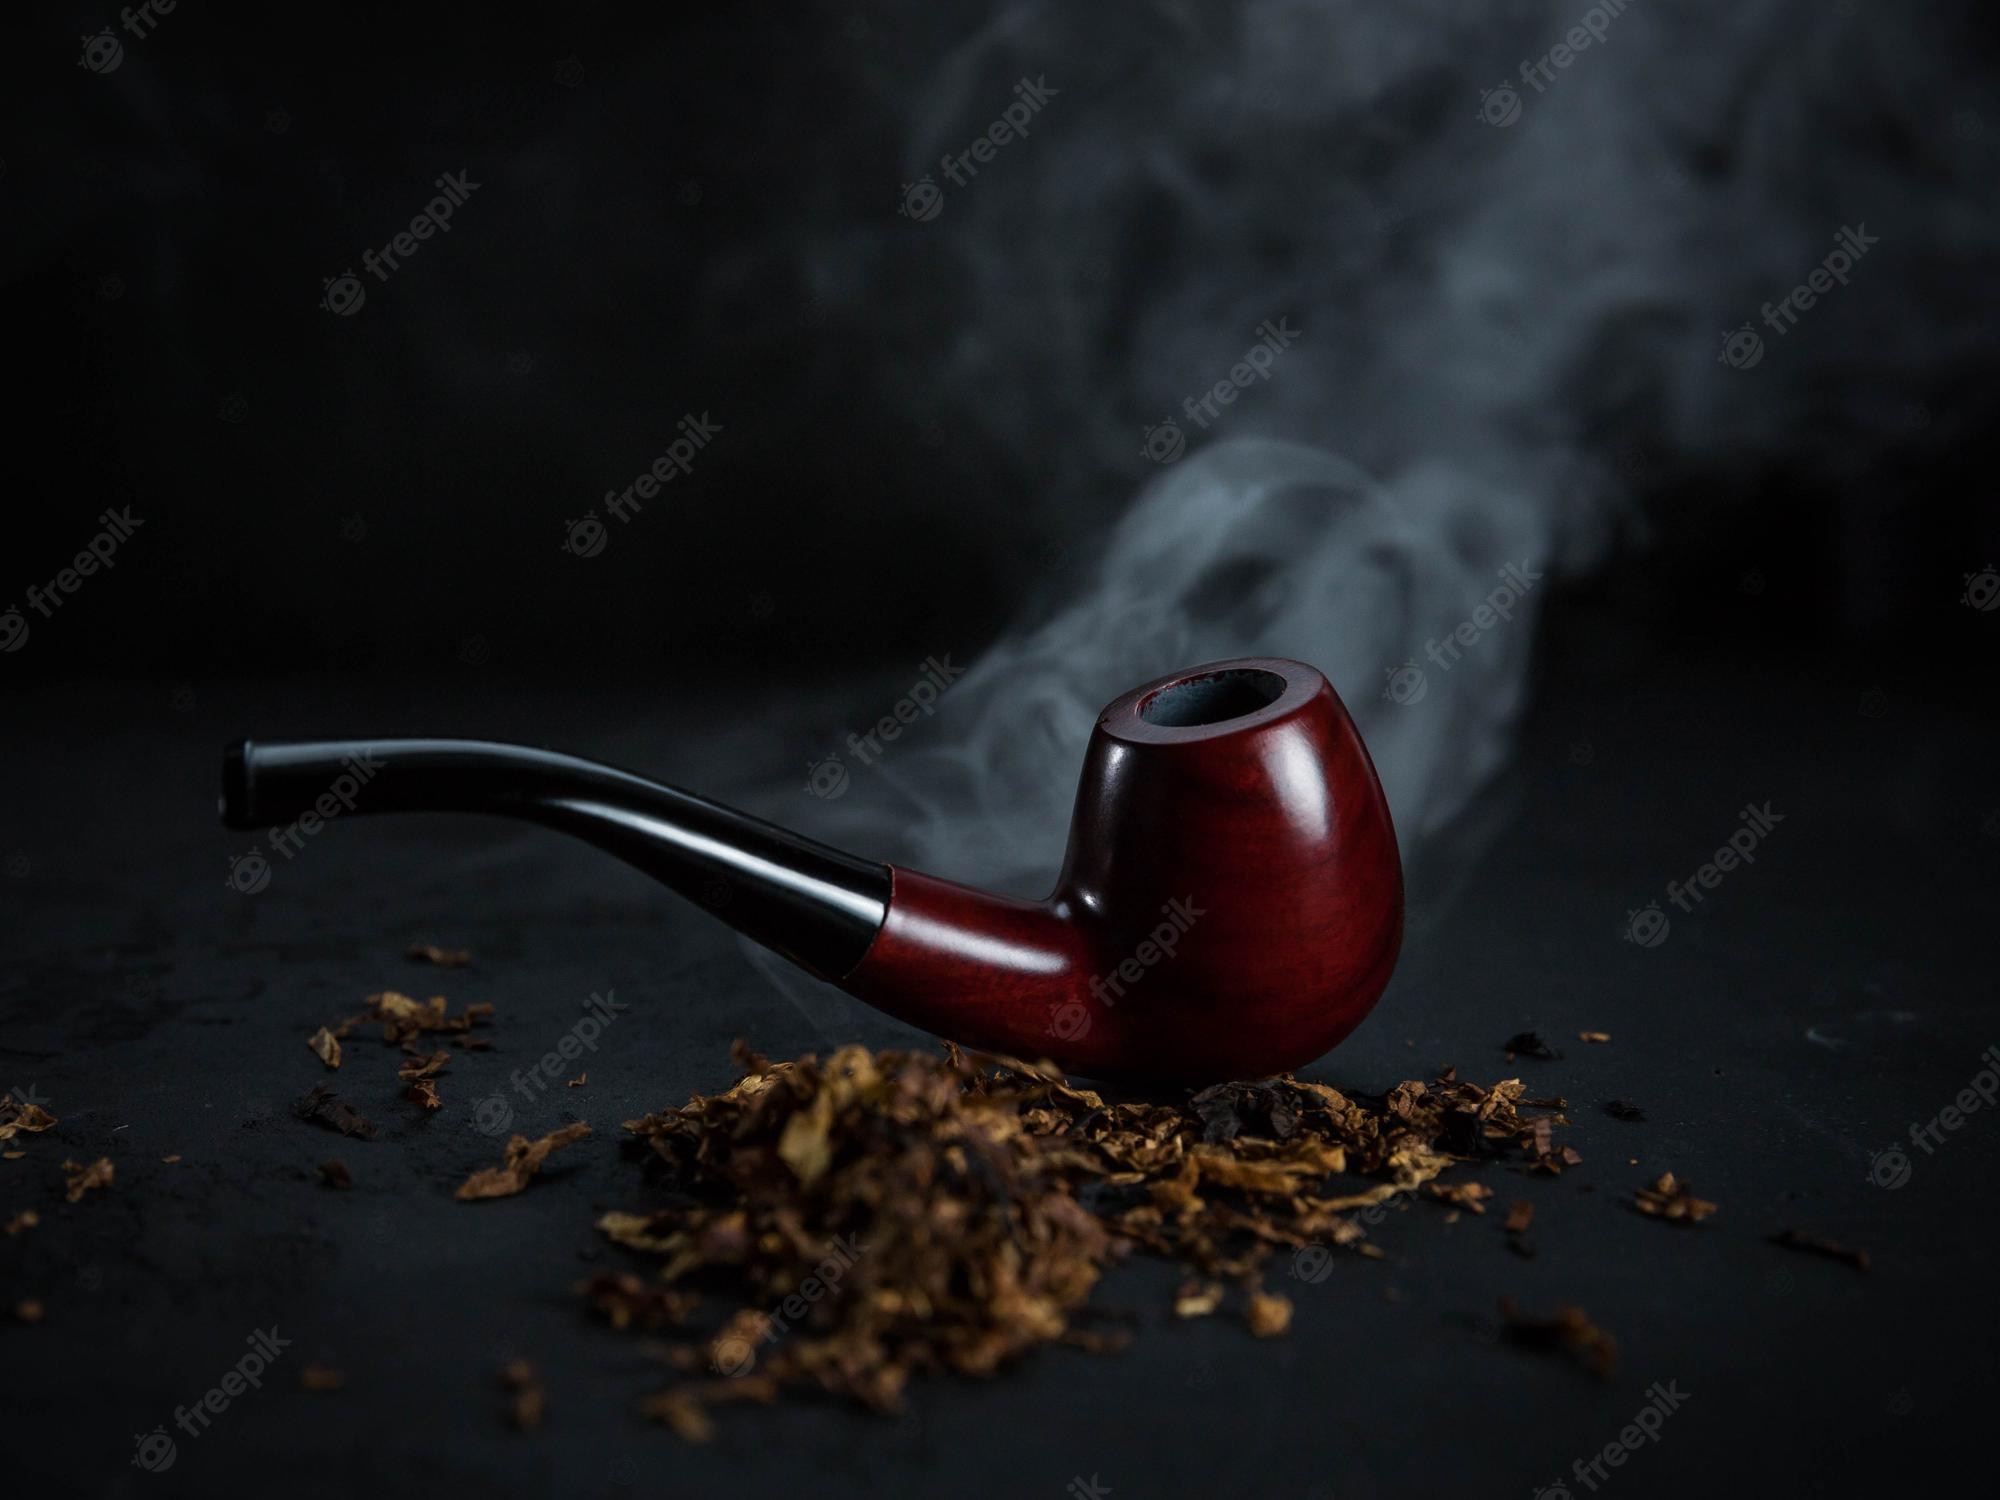 Tobacco Backgrounds